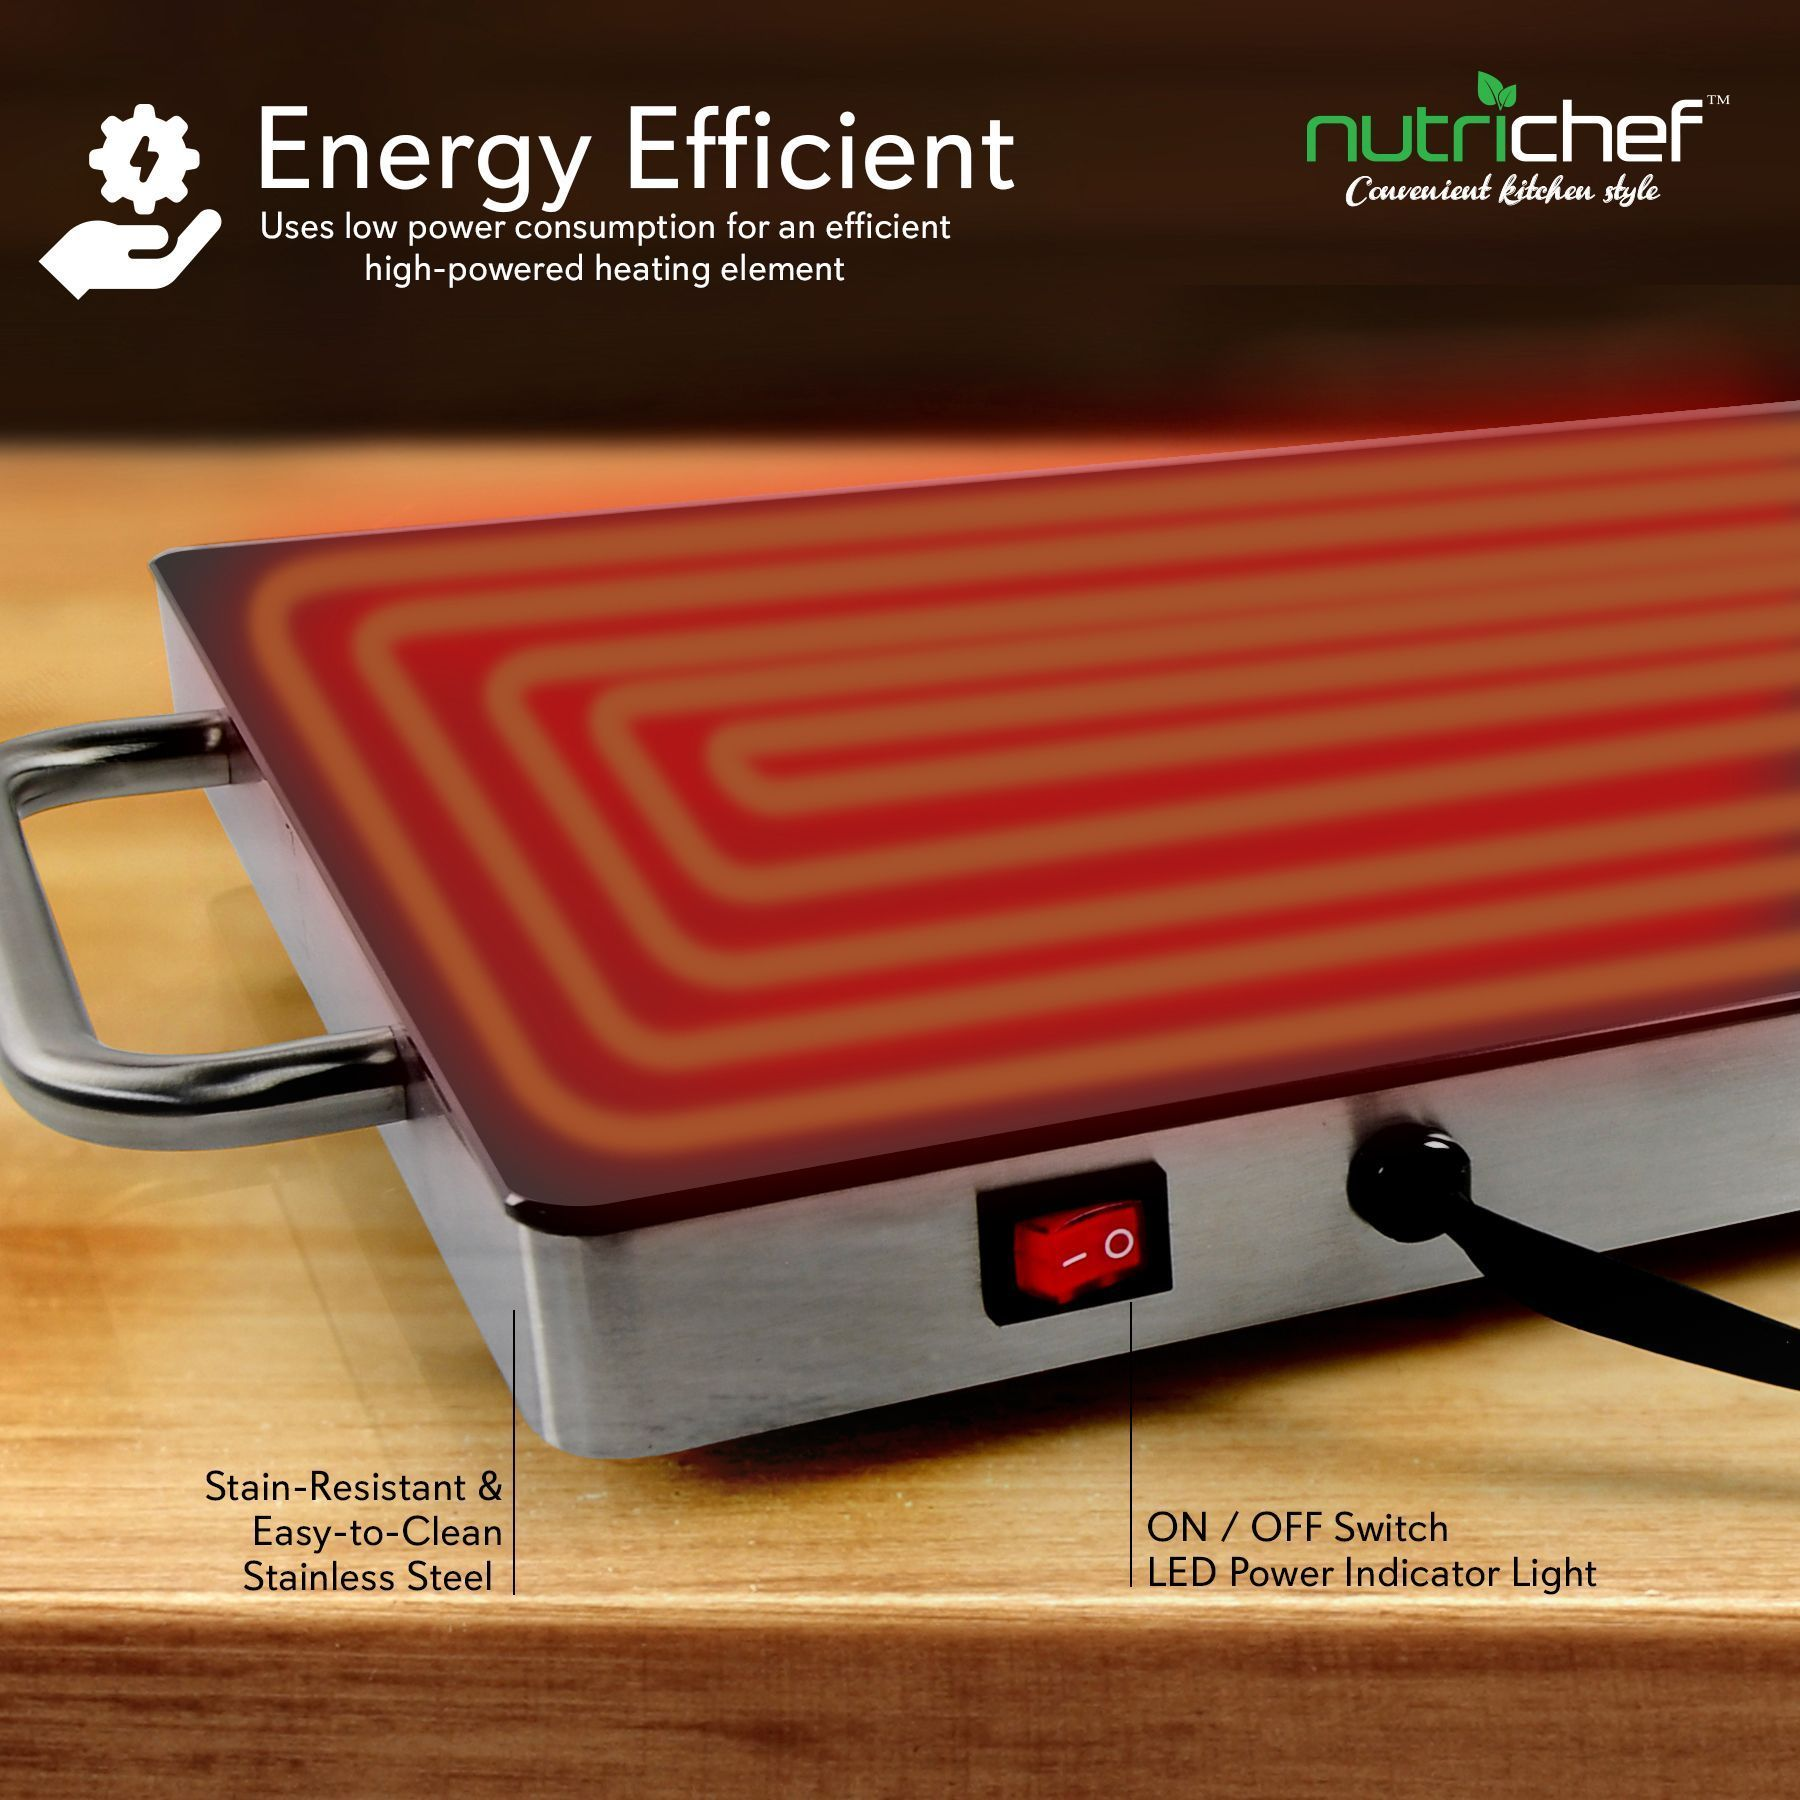 NutriChef Electric Warming Tray / Food Warmer W/ Non-Stick Heat-Resistant Glass Plate (14.5'' x 8.6'' Heating Surface) (PKWTR15)